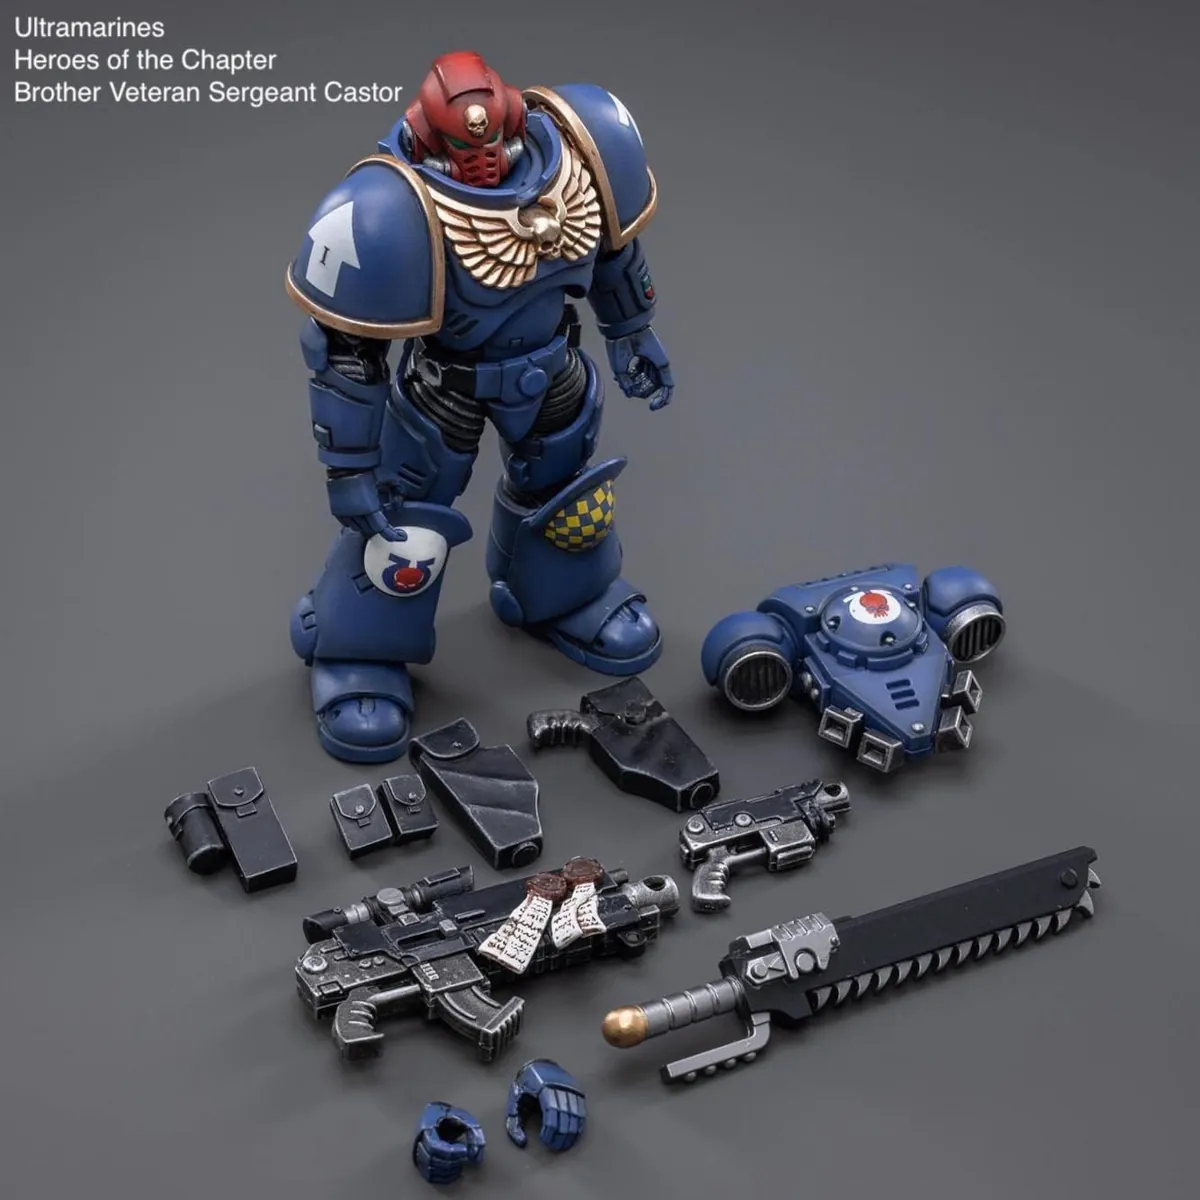 6973130372474 Warhammer 40K Ultramarines Heroes of the Chapter Brother Veteran Sergeant Castor 1-18 Scale Action Figure Accessories